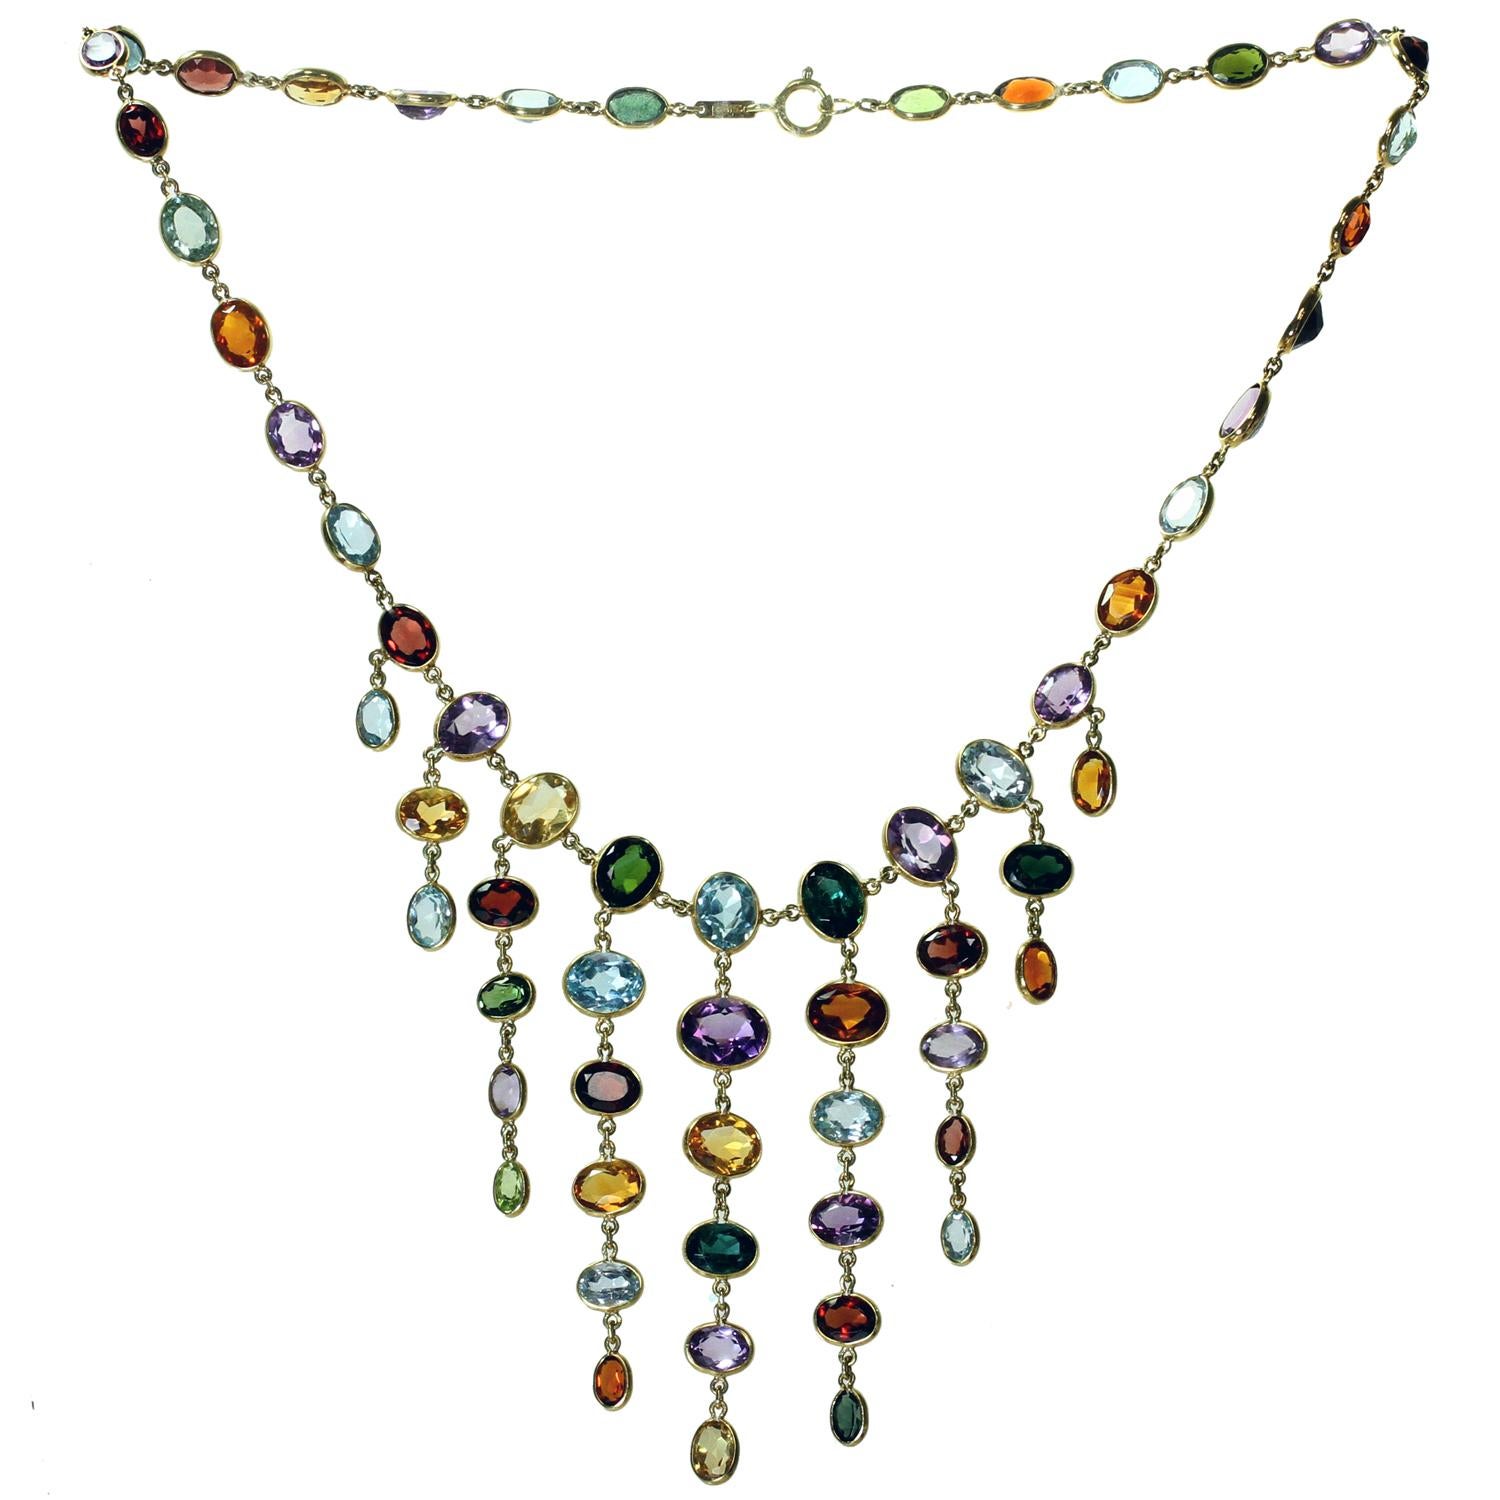 This exquisite H. Stern chandelier necklace is crafted in 18k yellow gold and set with a vibrant multi-colored array of faceted oval gemstones: aquamarine, garnet, peridot, blue topaz, amethyst, citrine, and tourmaline. Made in Brazil circa 1980s.